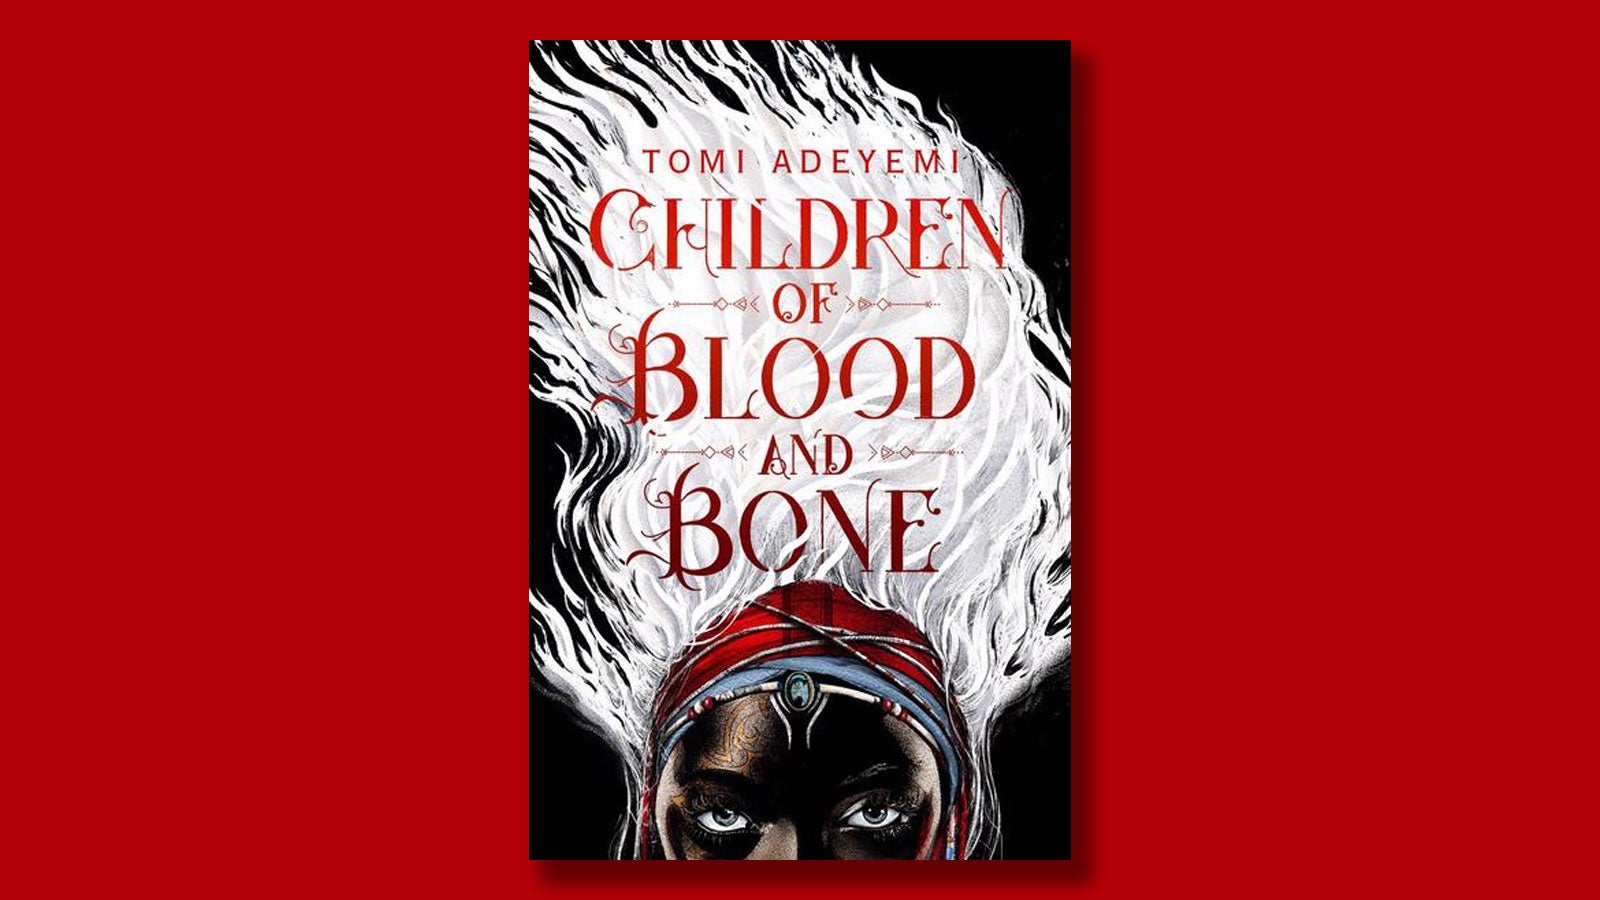 Children of Blood and Bone by Tomi Adeyemi on a red background.